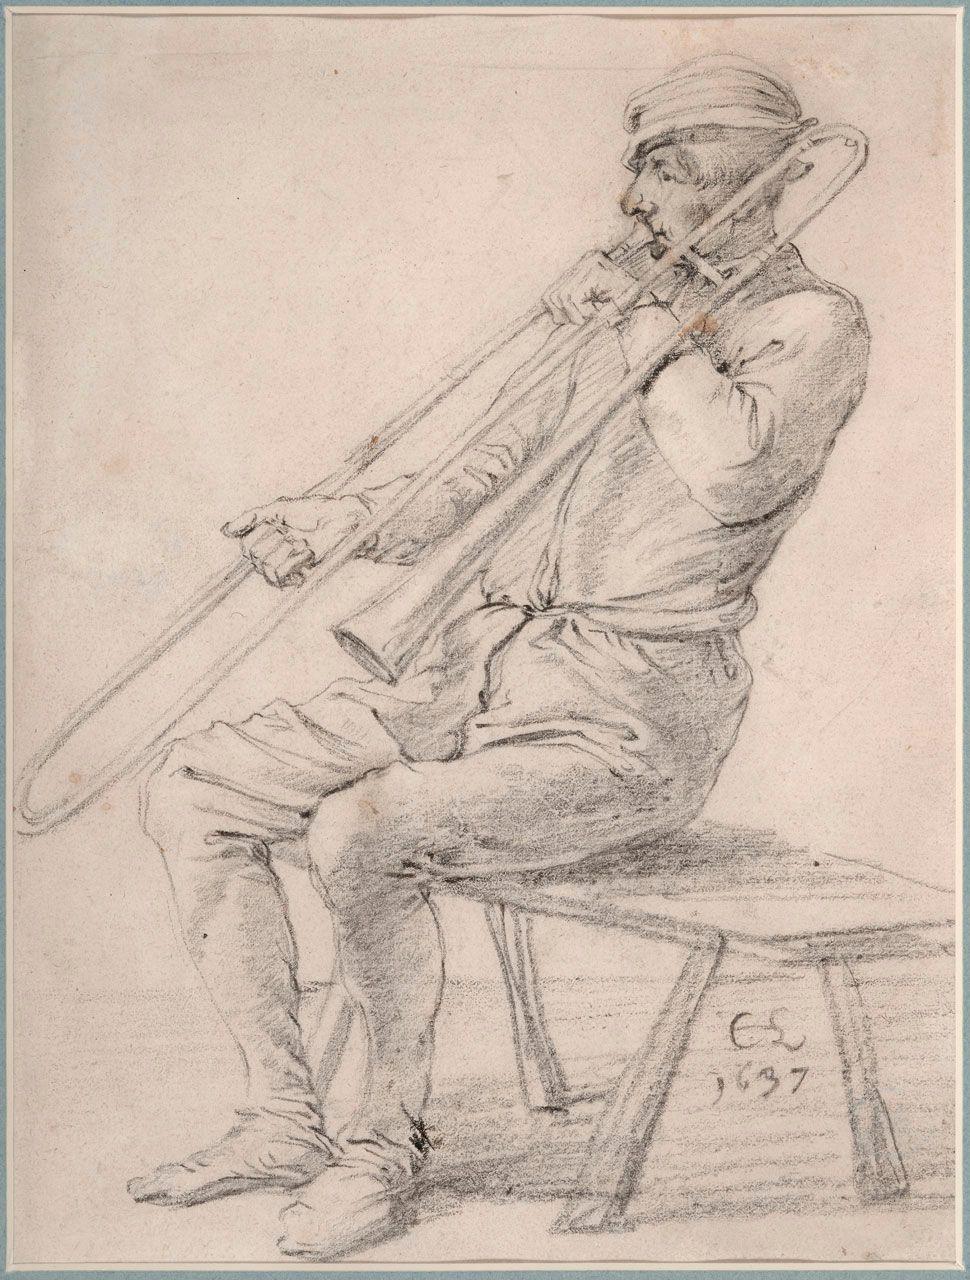 A Seated Man Playing a Sackbut
Cornelis  Saftleven 
17th Century
2015.14